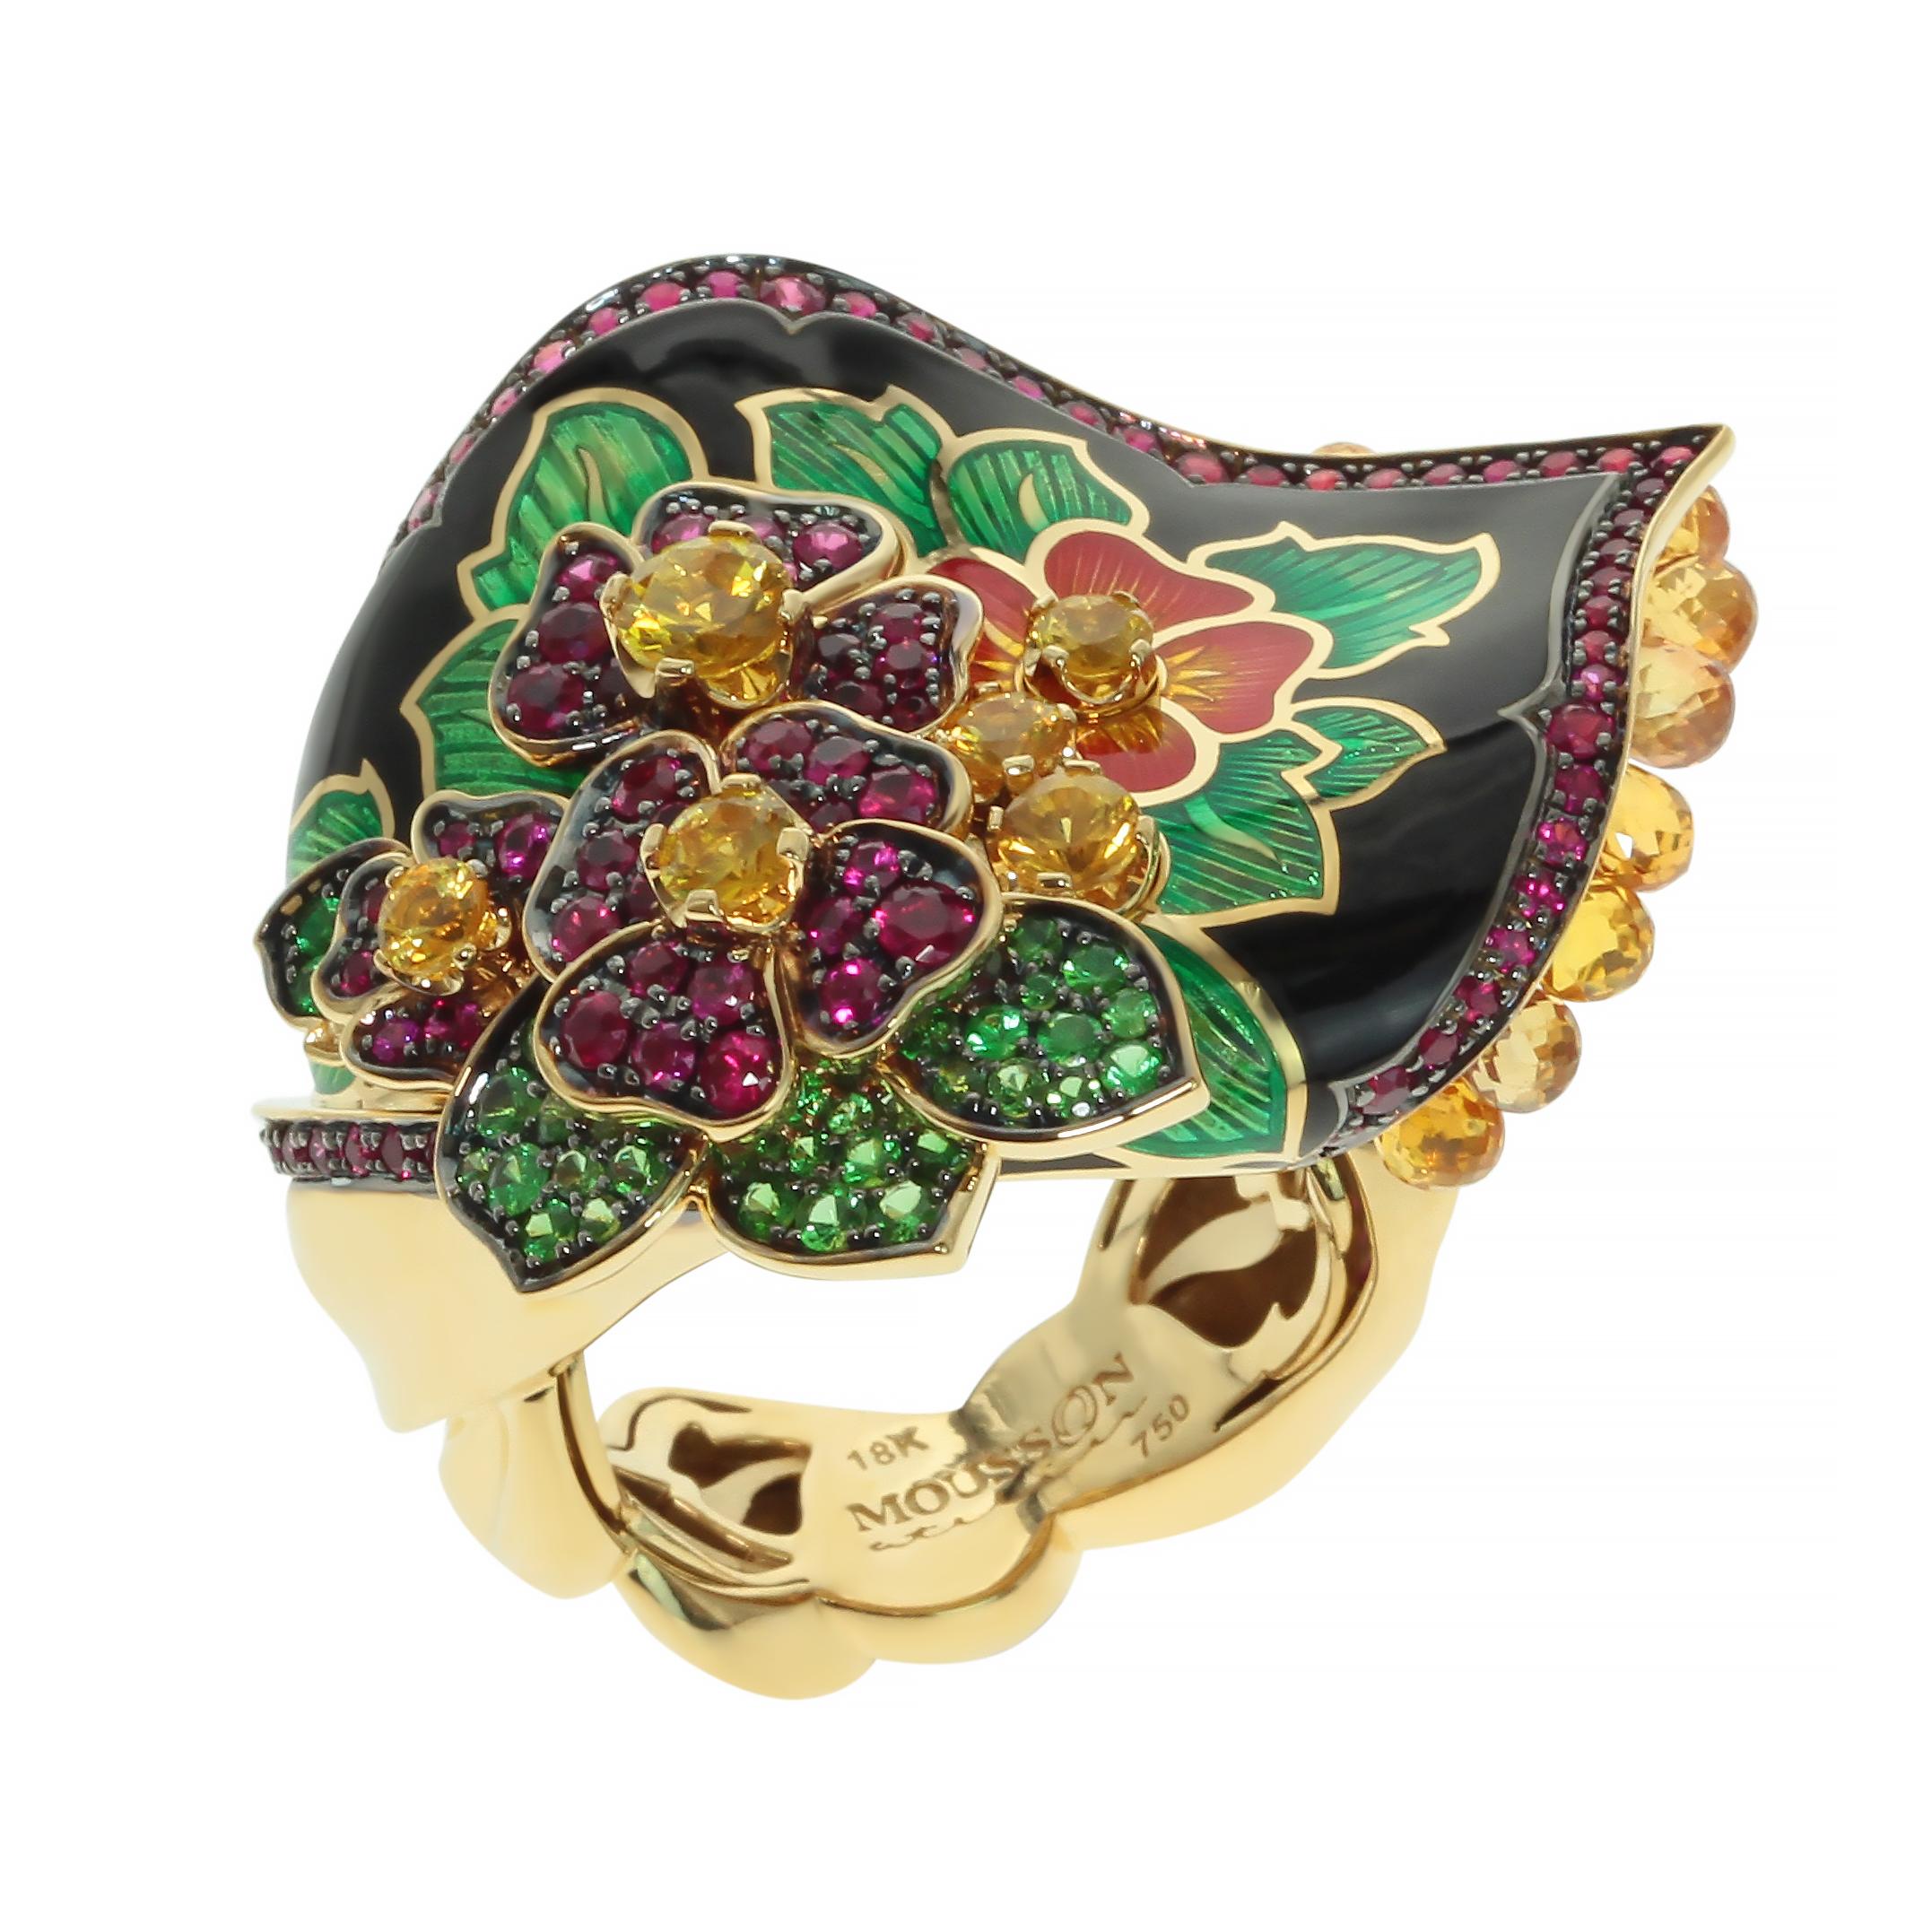 Ruby Yellow Sapphire Tsavorite Enamel A'la Russe Suite
What do you know about Pavlovo Posad shawls? This is a large part of Russian culture, which originated in the 17th century. They are large patterned scarves, which are usually presented as a